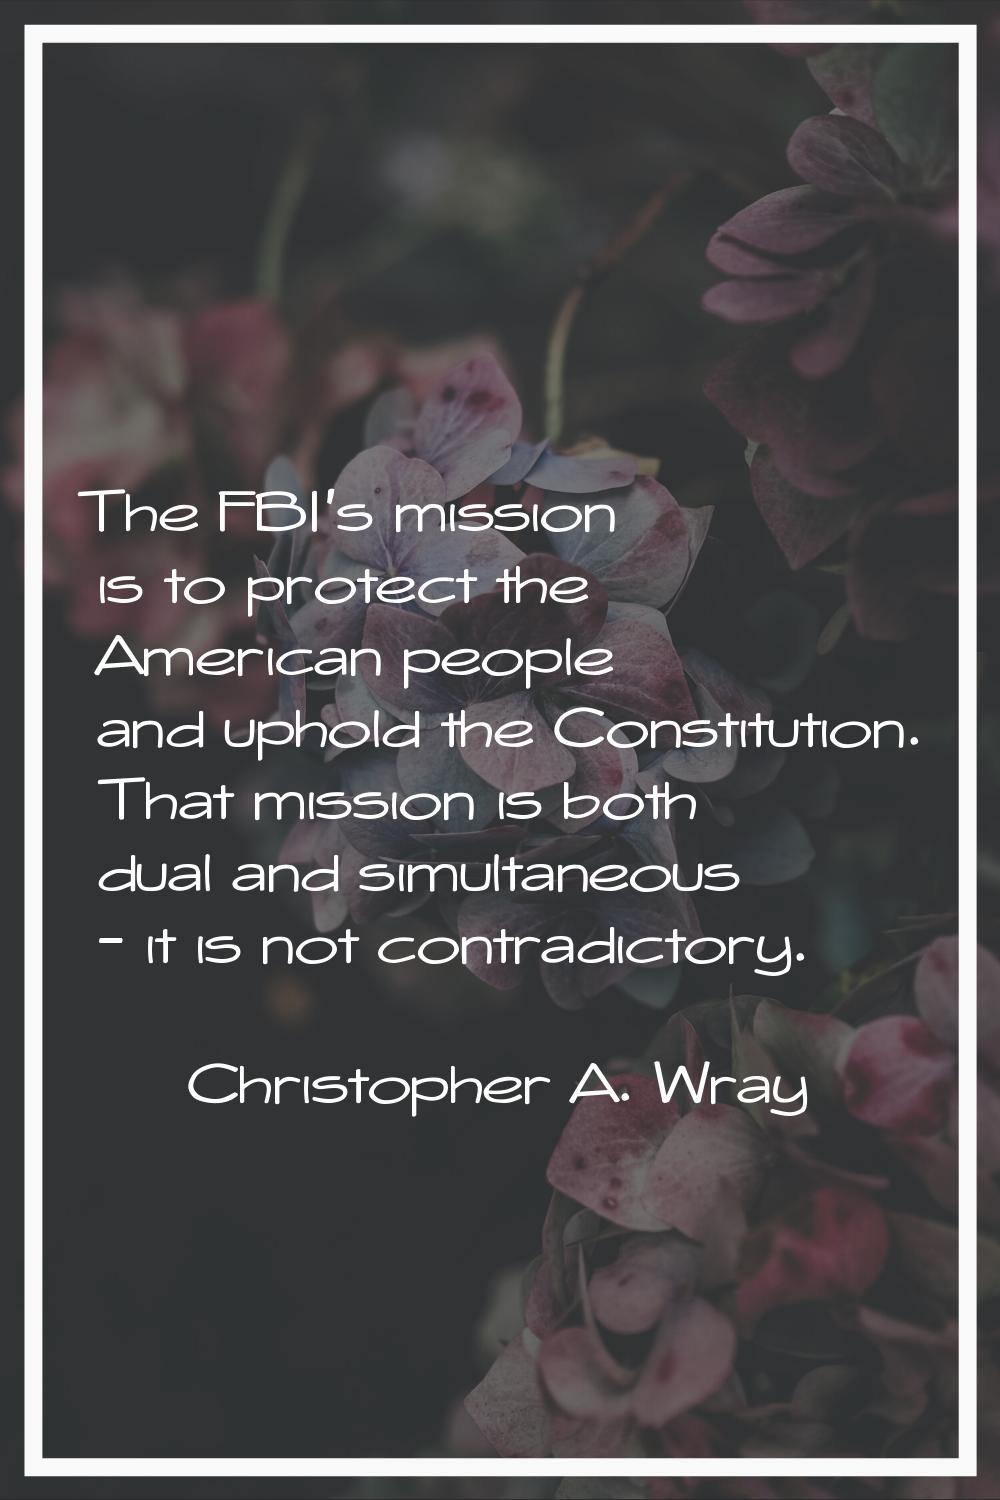 The FBI's mission is to protect the American people and uphold the Constitution. That mission is bo